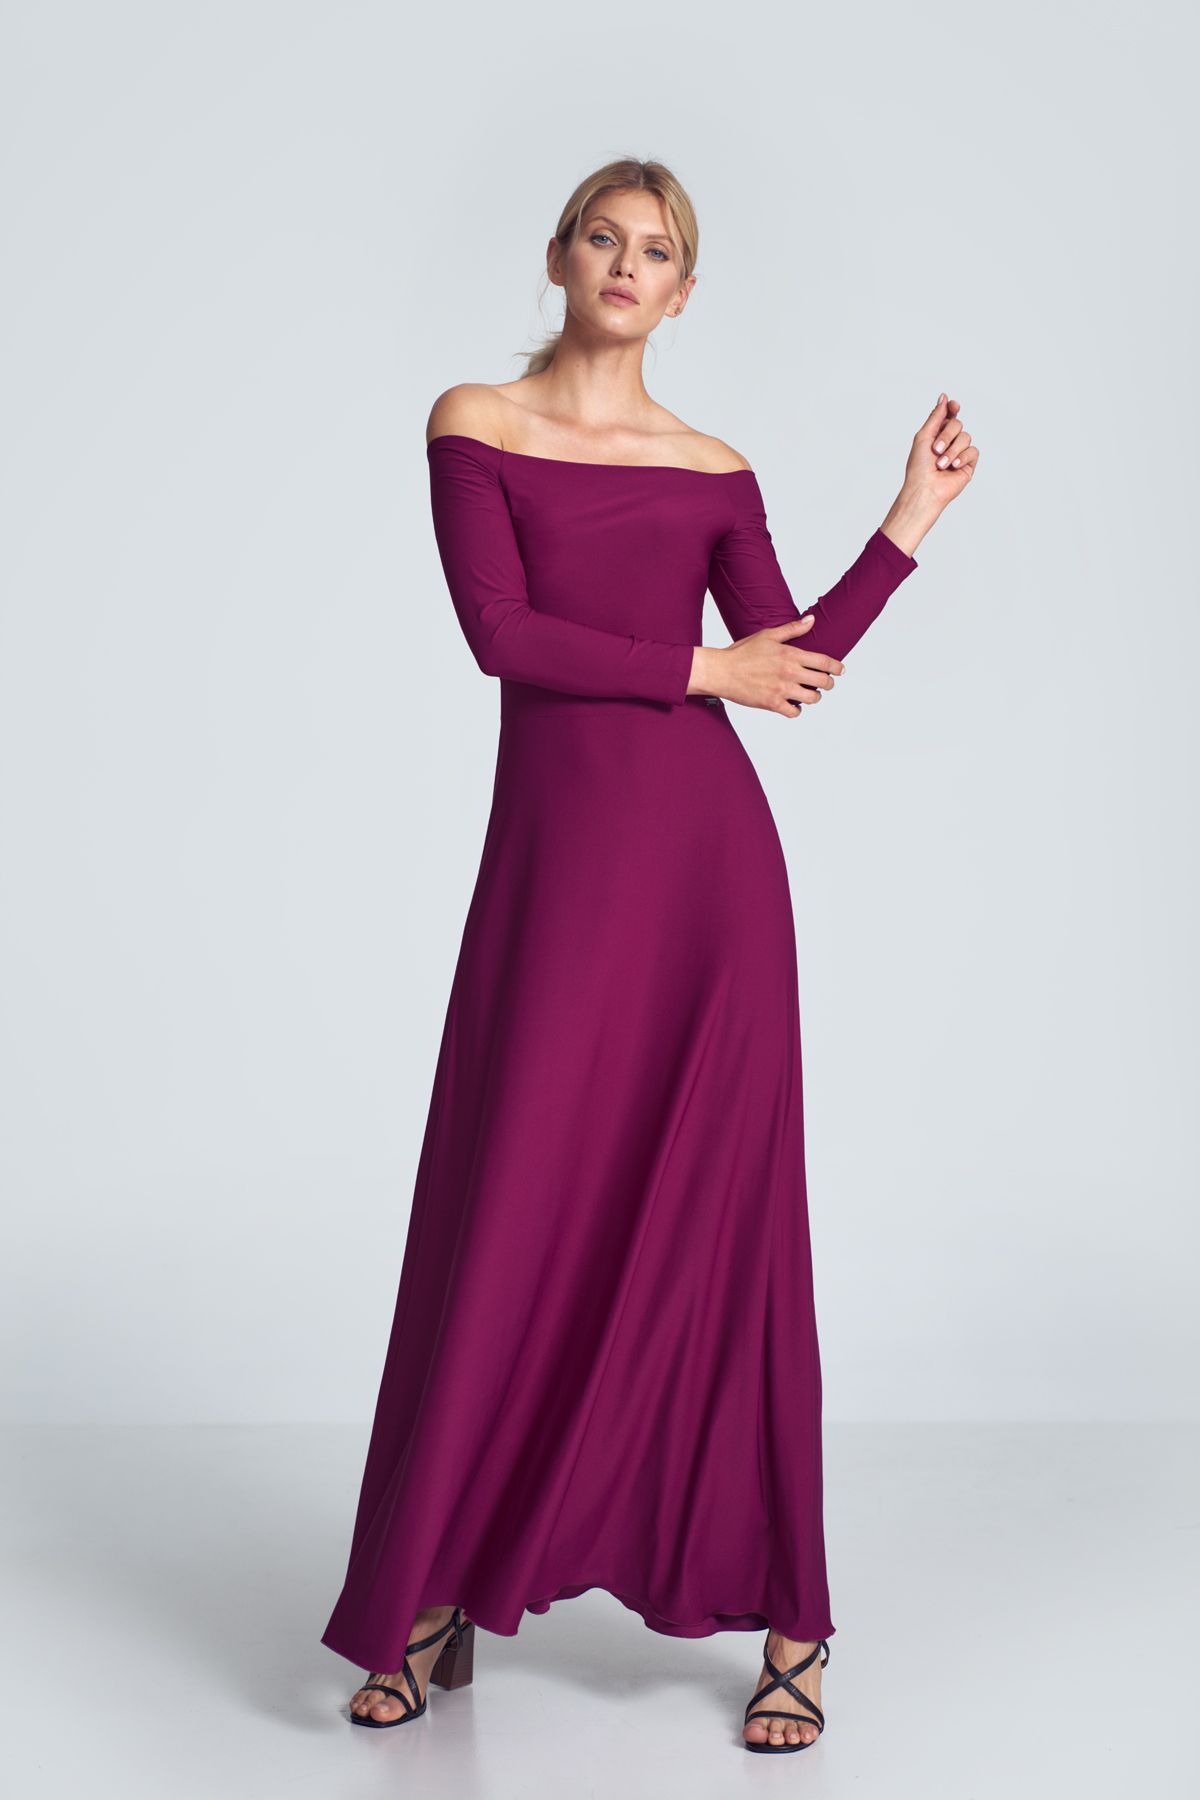 Fuchsia sensual maxi dress with long sleeves, large neckline - cold shoulders, pleats at the bust, sewn at the waist.